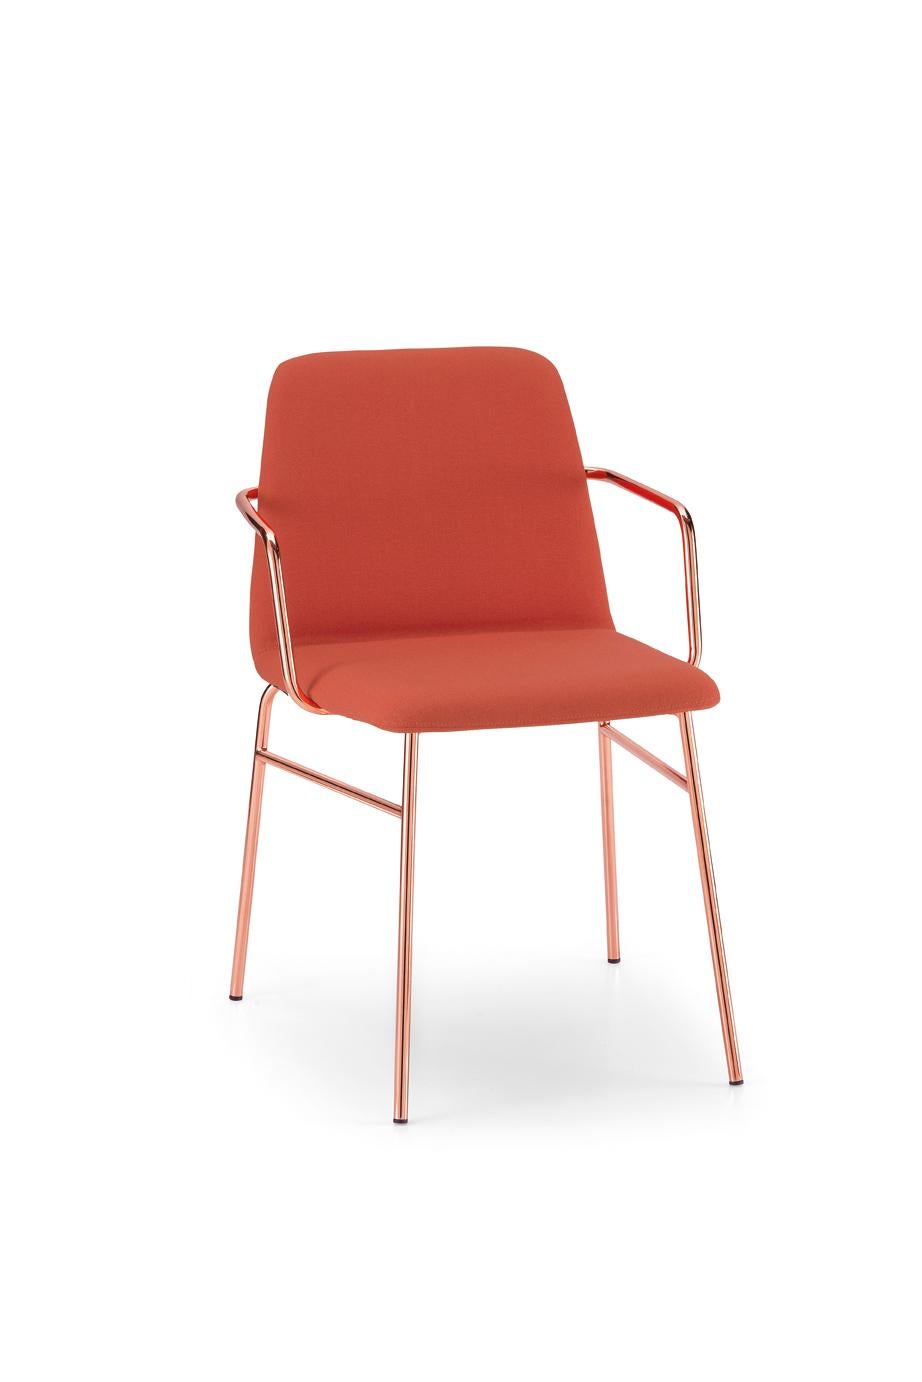 Bardot met stands out for its elegance and brightness, extending its style to include new frames, pastel and vibrant shades, and refined, contemporary finishes. The frame of the new chair and stool is lighter, through the use of clean-lined, metal